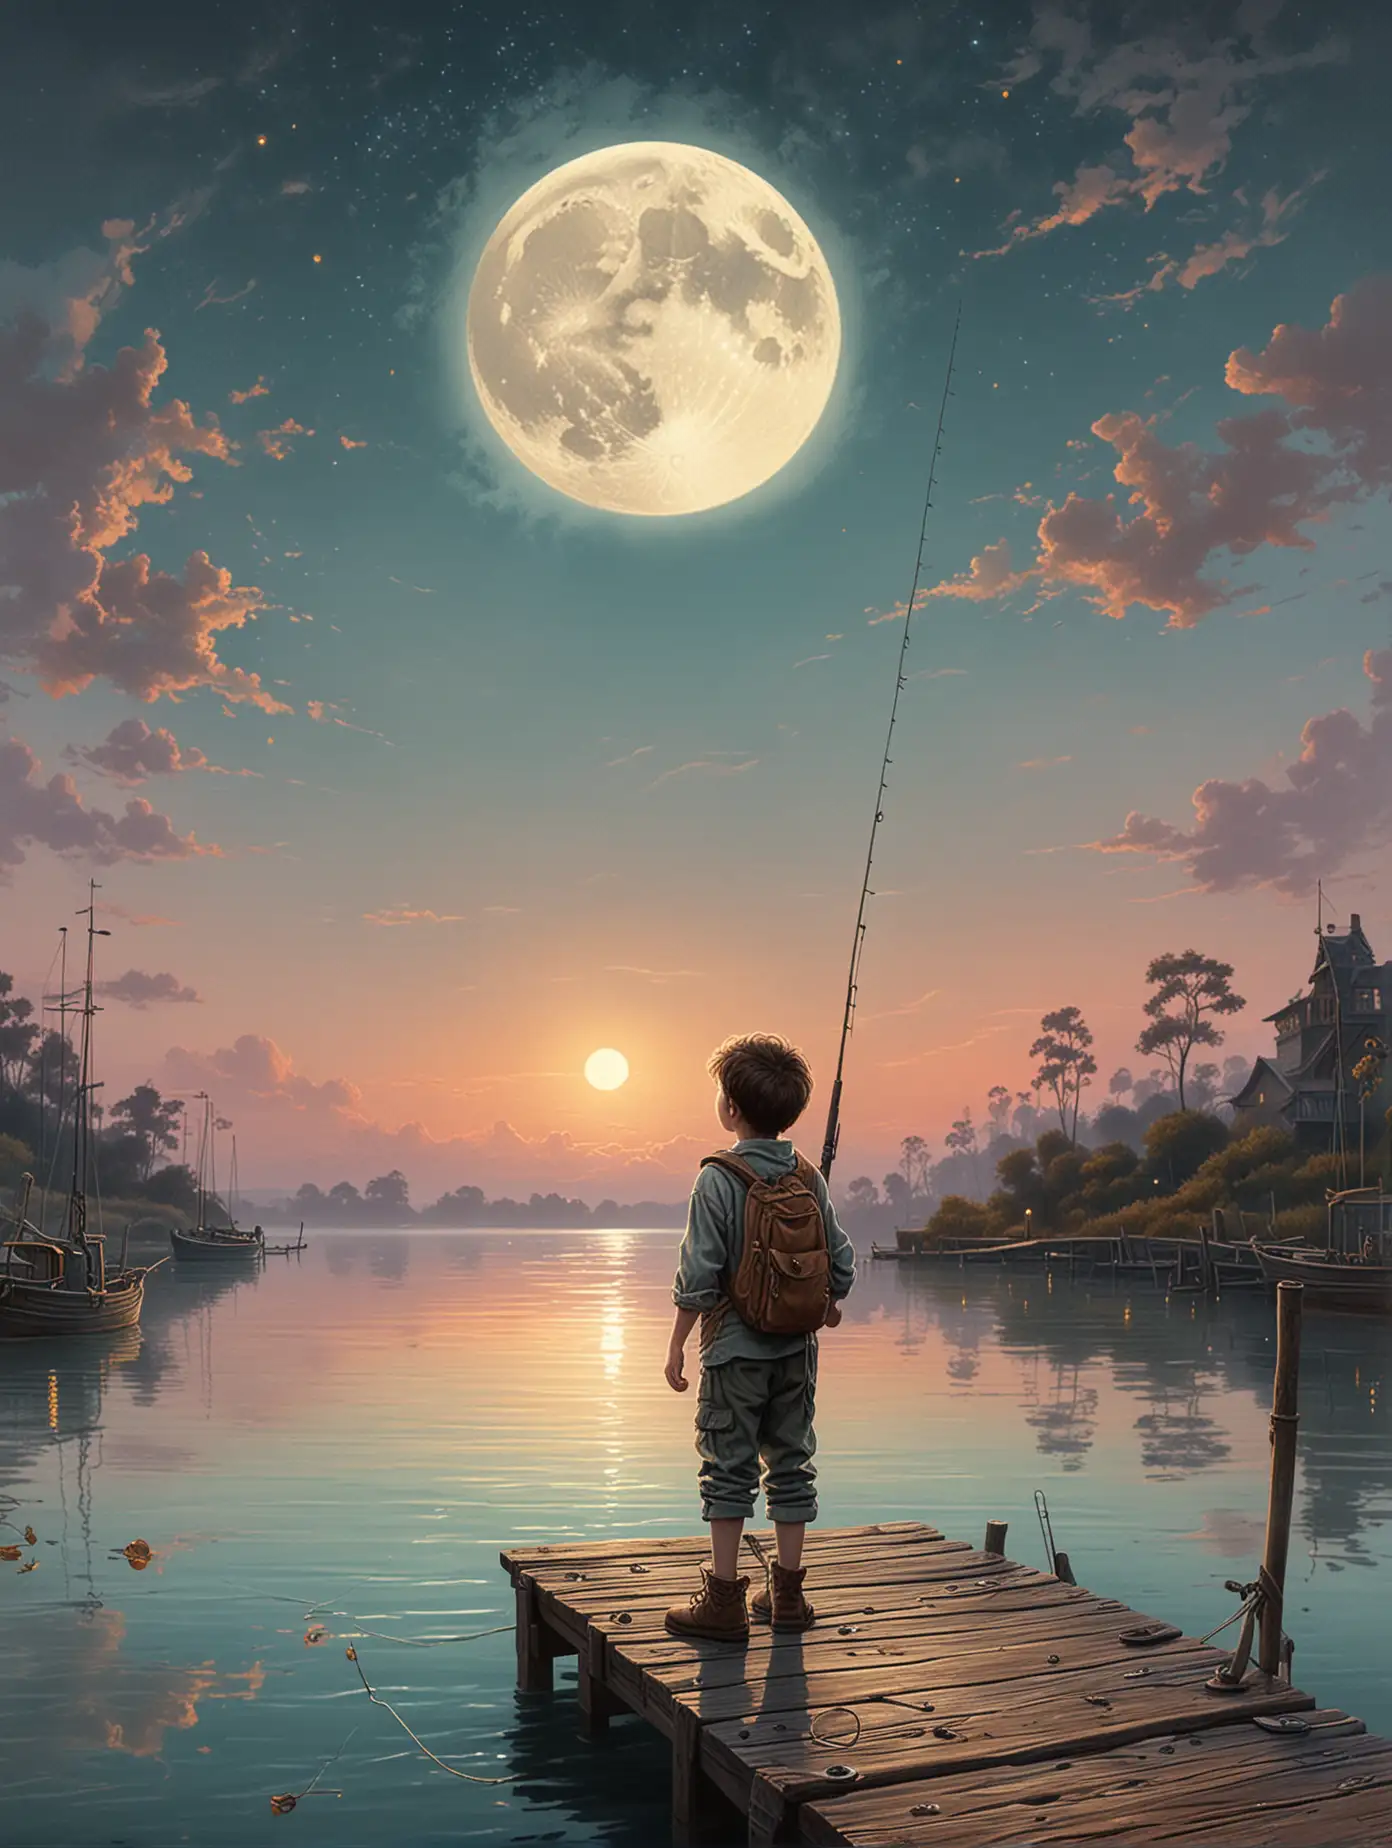 little boy standing on a dock, holding a fishing rod, looking up at the big moon, pastel colors, vintage, kerem beyit, by Daniel Merriam, esao andrews, ornate, by Kerembeyit, inspired by Daniel Merriam, by Jan Kip, daniel merriam, highly detailed digital artwork, antique, vintage, dusty, and rugged illustration, poster composition